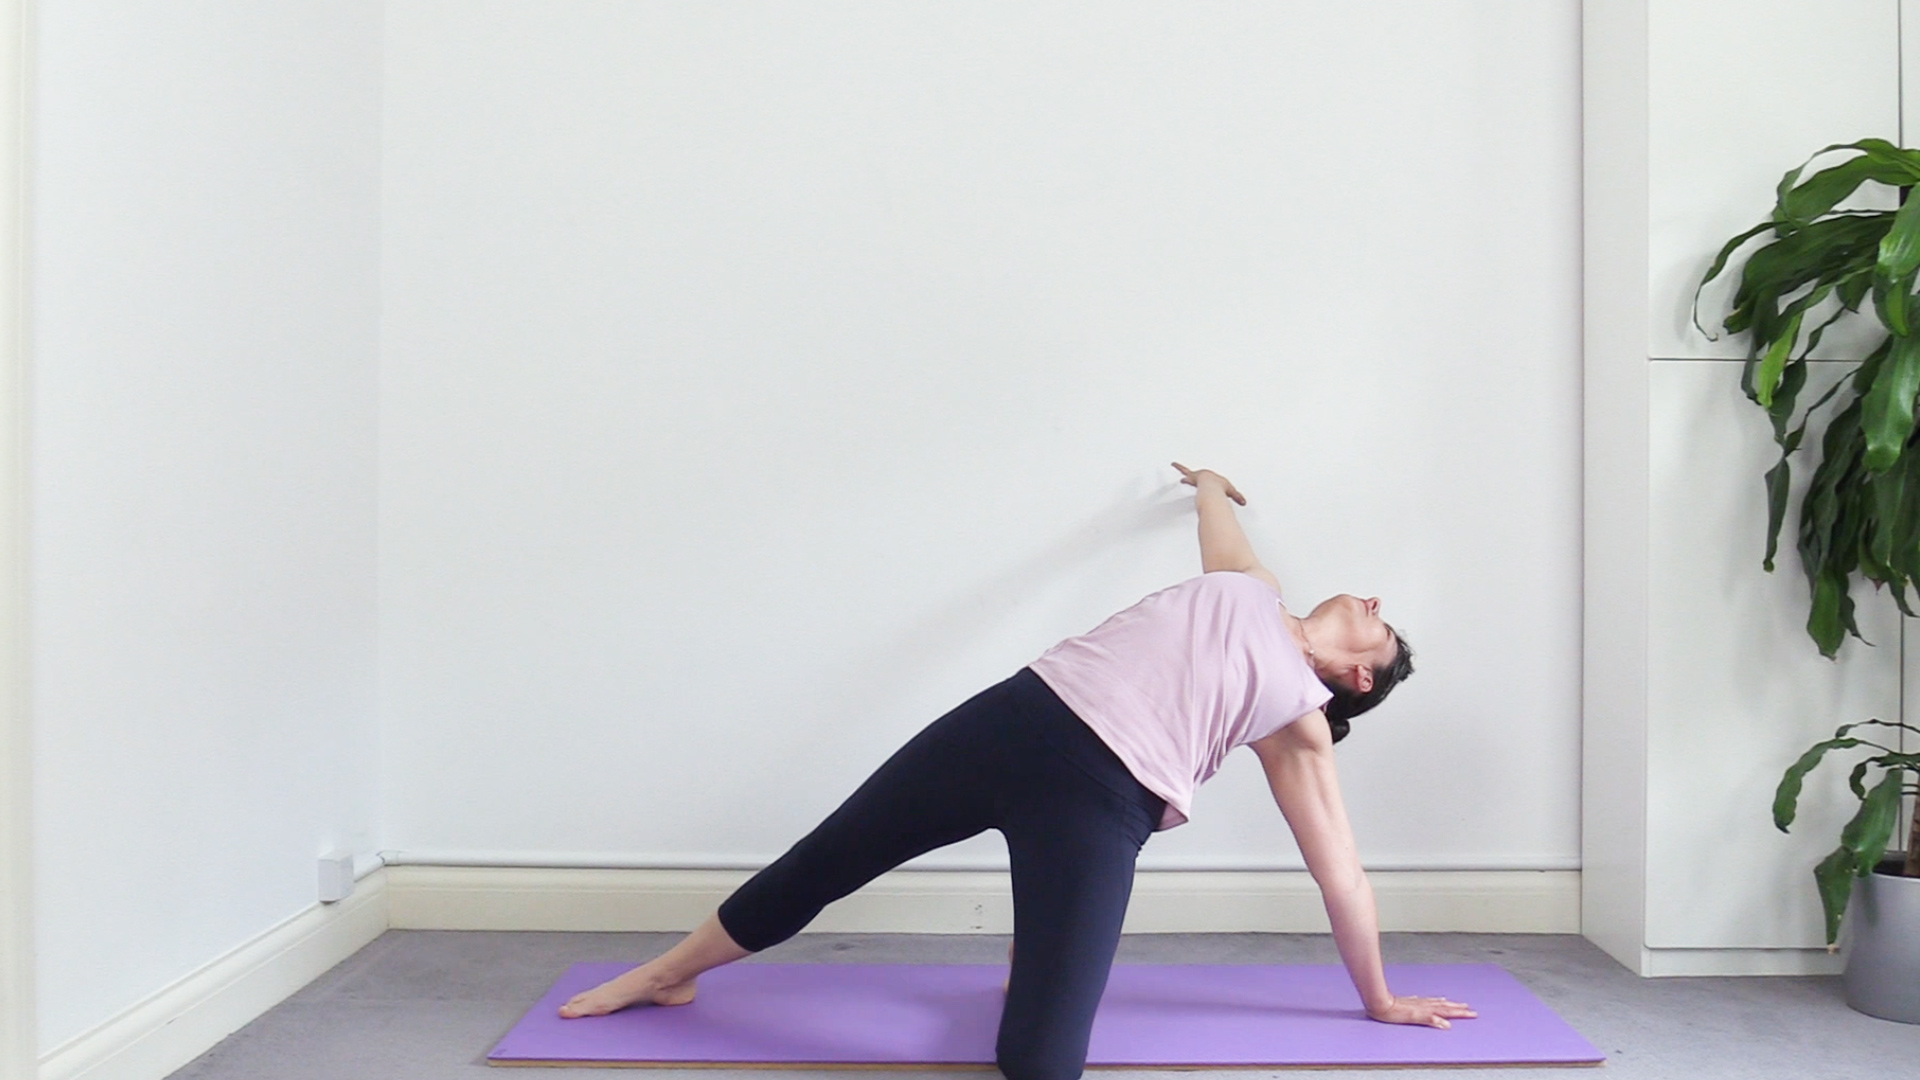 3 Ways to Do Five Pointed Star Pose in Yoga - wikiHow Fitness